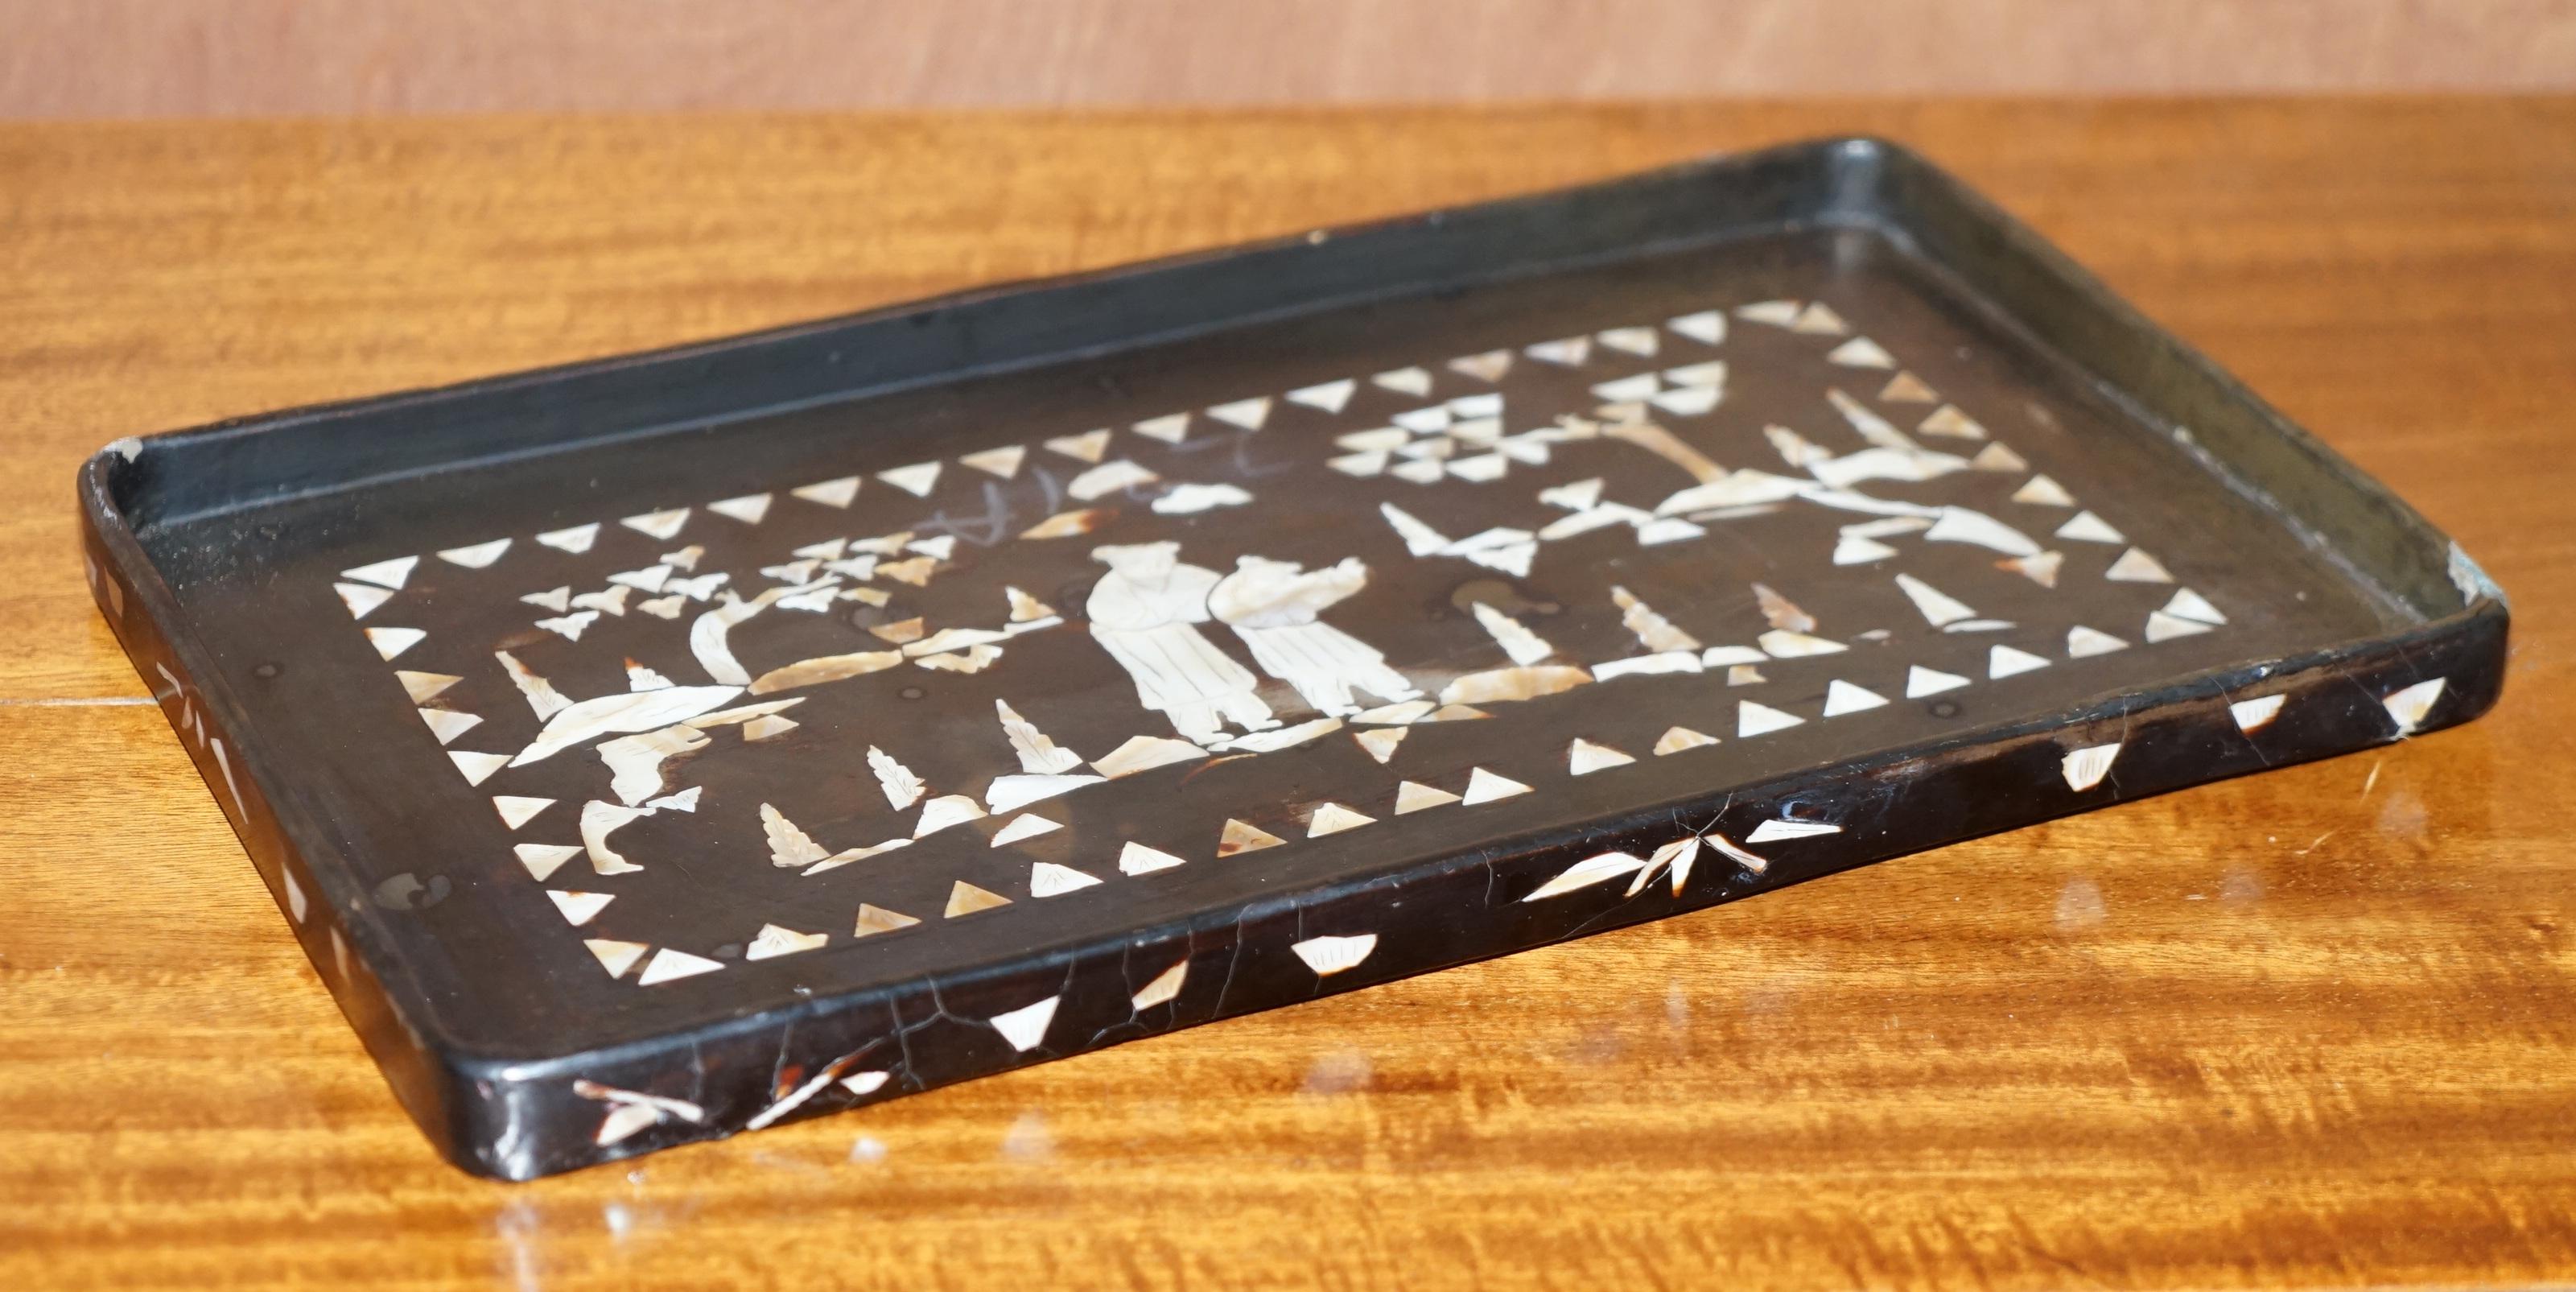 Stunning Antique Chinese Mother of Pearl Inliad Paper Mache Tray Serving Drinks 4